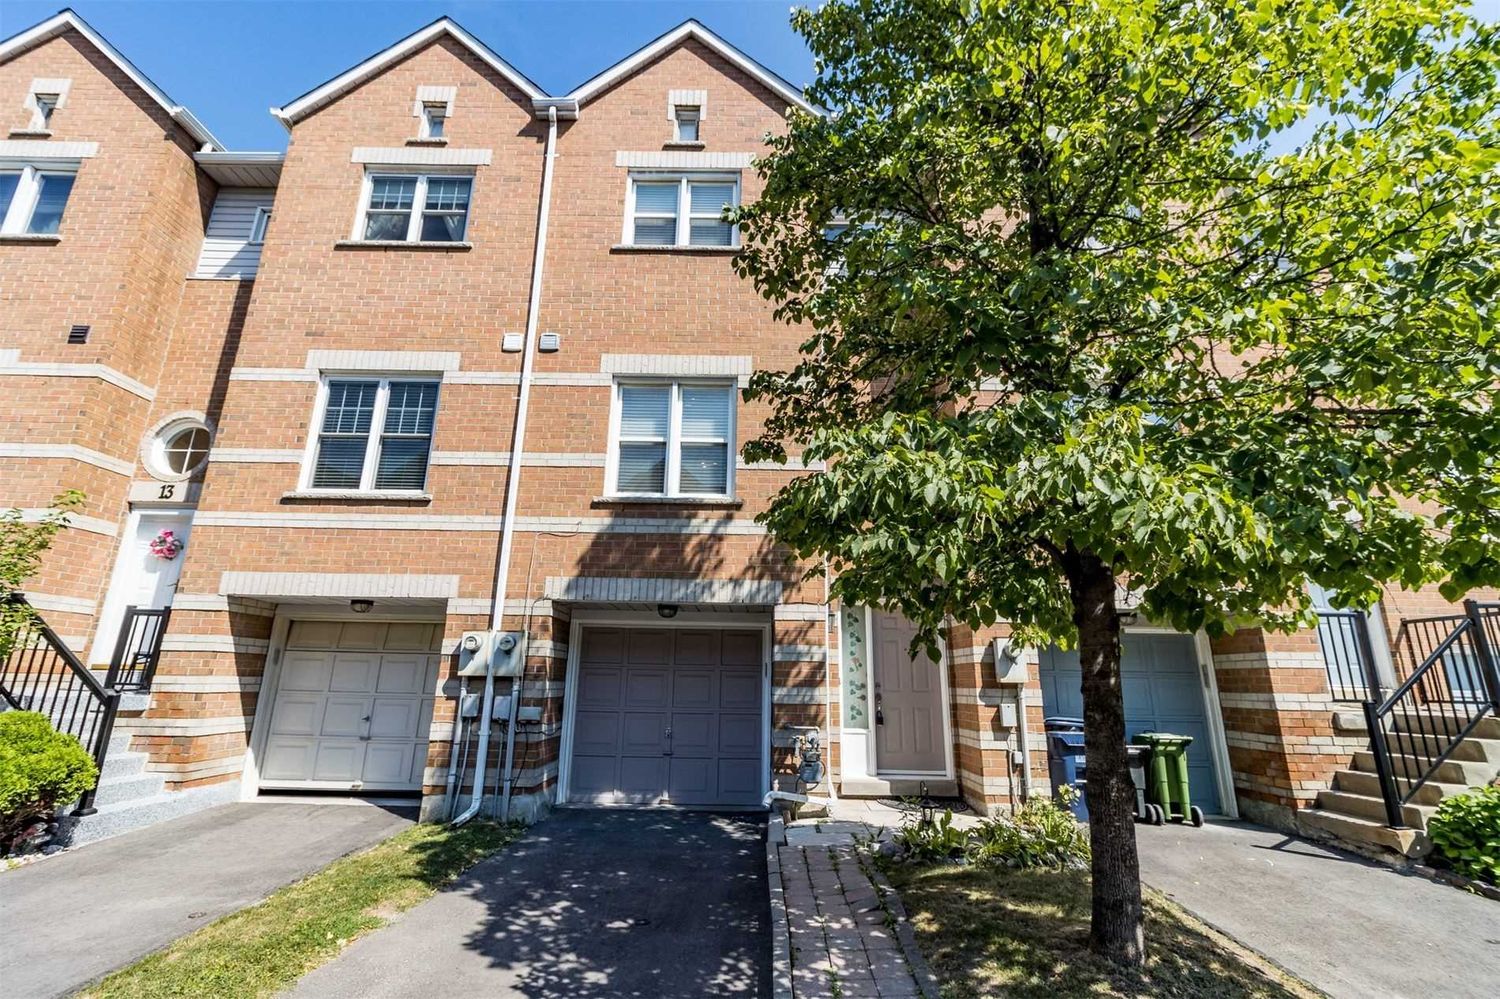 630 Evans Avenue. 630 Evans Avenue Townhomes is located in  Etobicoke, Toronto - image #2 of 3